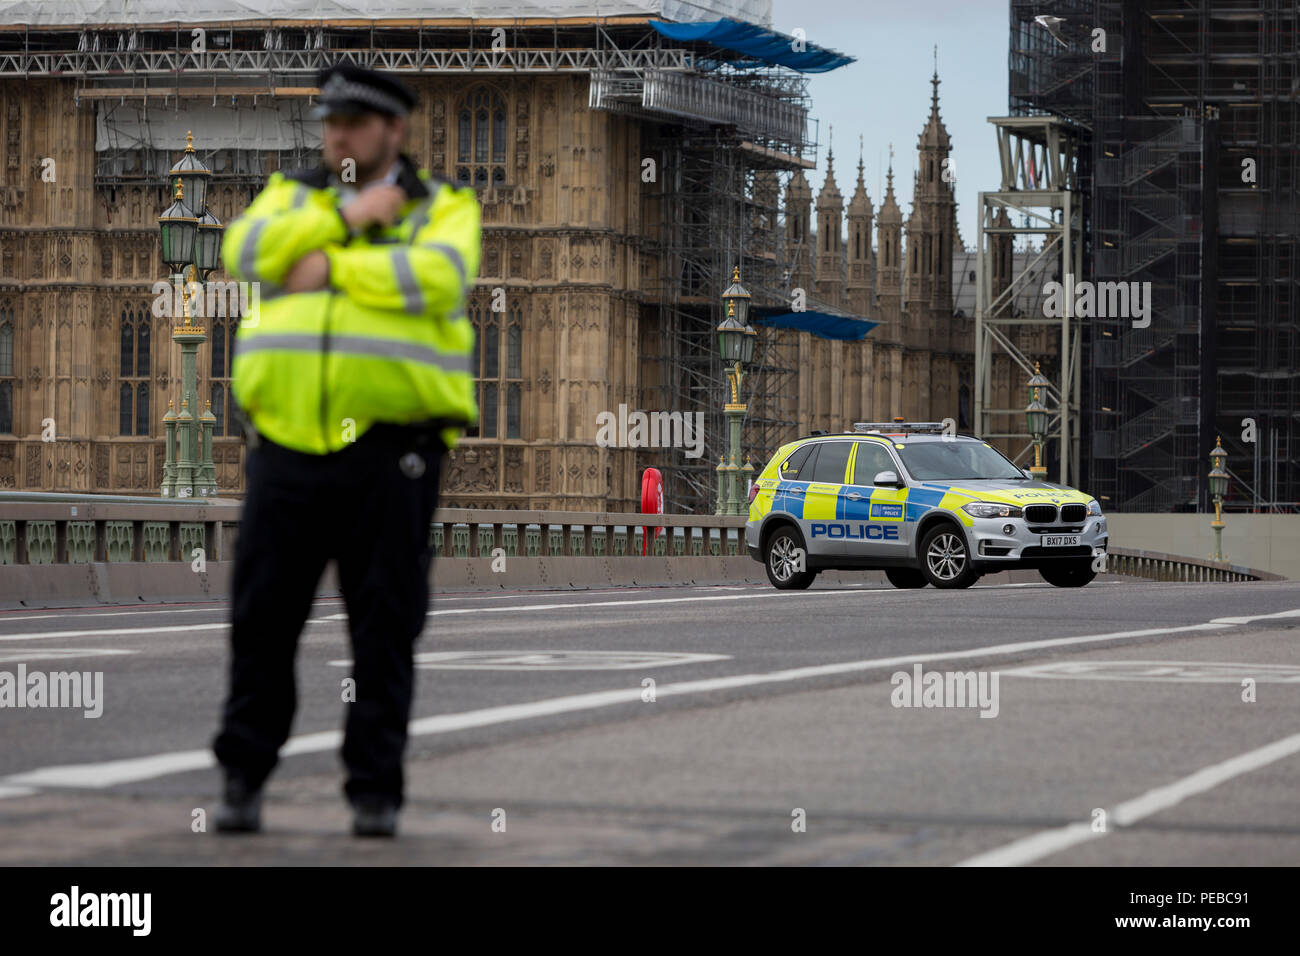 London, UK 14th August 2018: Police block Westminster Bridge as Westminster experiences a lockdown with extensive cordons and the closure of many streets after what police are calling a terrorist incident in which a car was crashed into security barriers outside parliament in central London, on 14th August 2018, in London, England. Photo by Richard Baker / Alamy Live News. Stock Photo